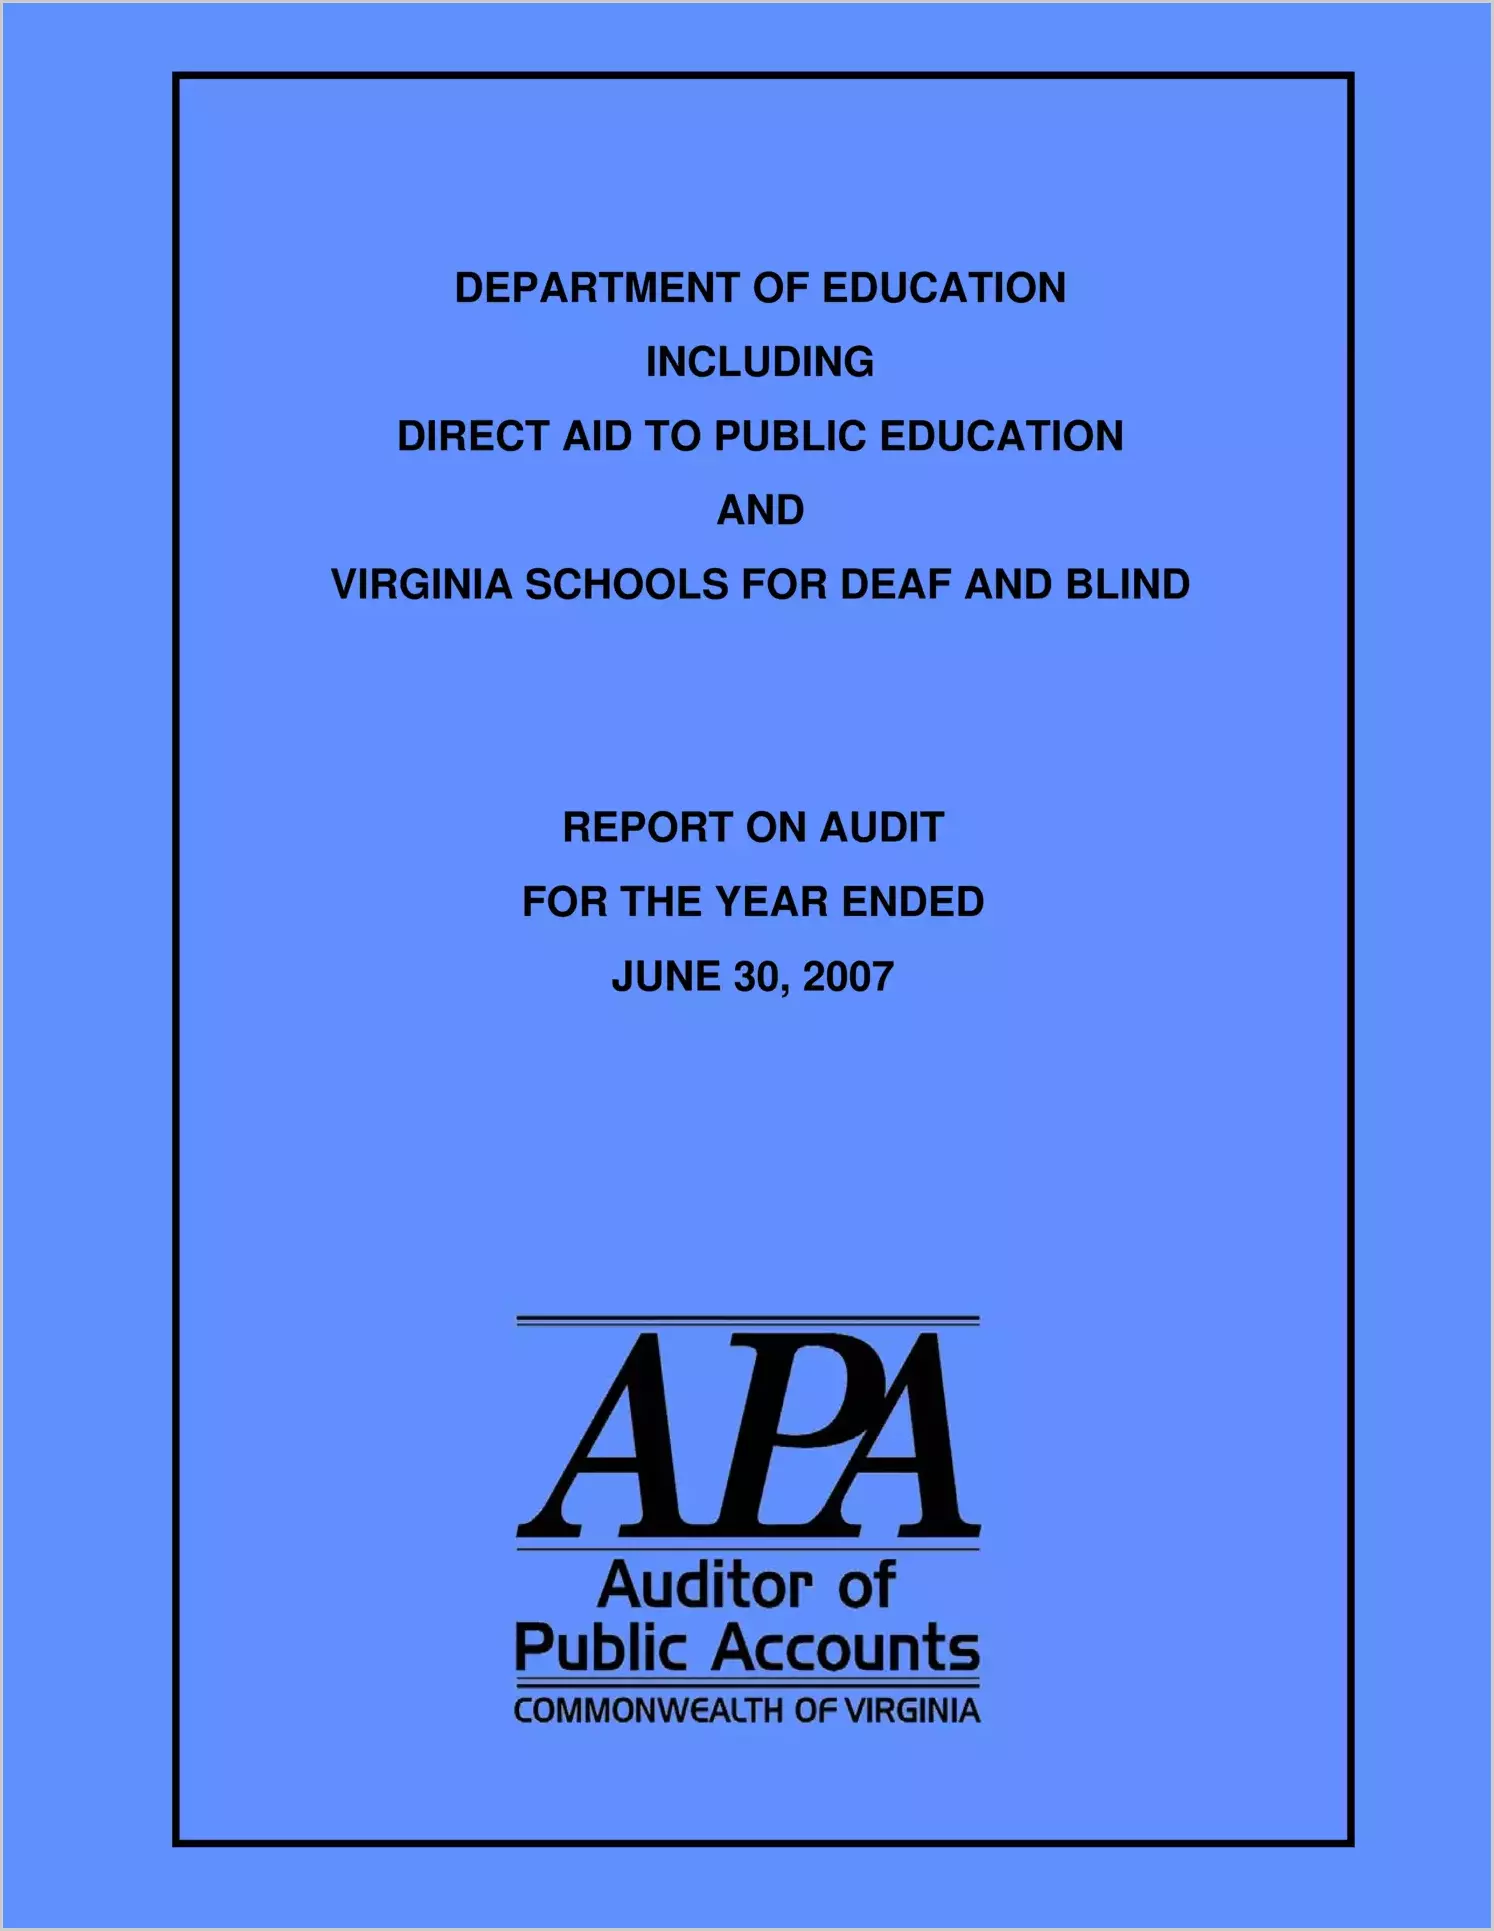 Department of Education Including Direct Aid to Public Education and  Virginia Schools for the Deaf and Blind for the year ended June 30, 2007